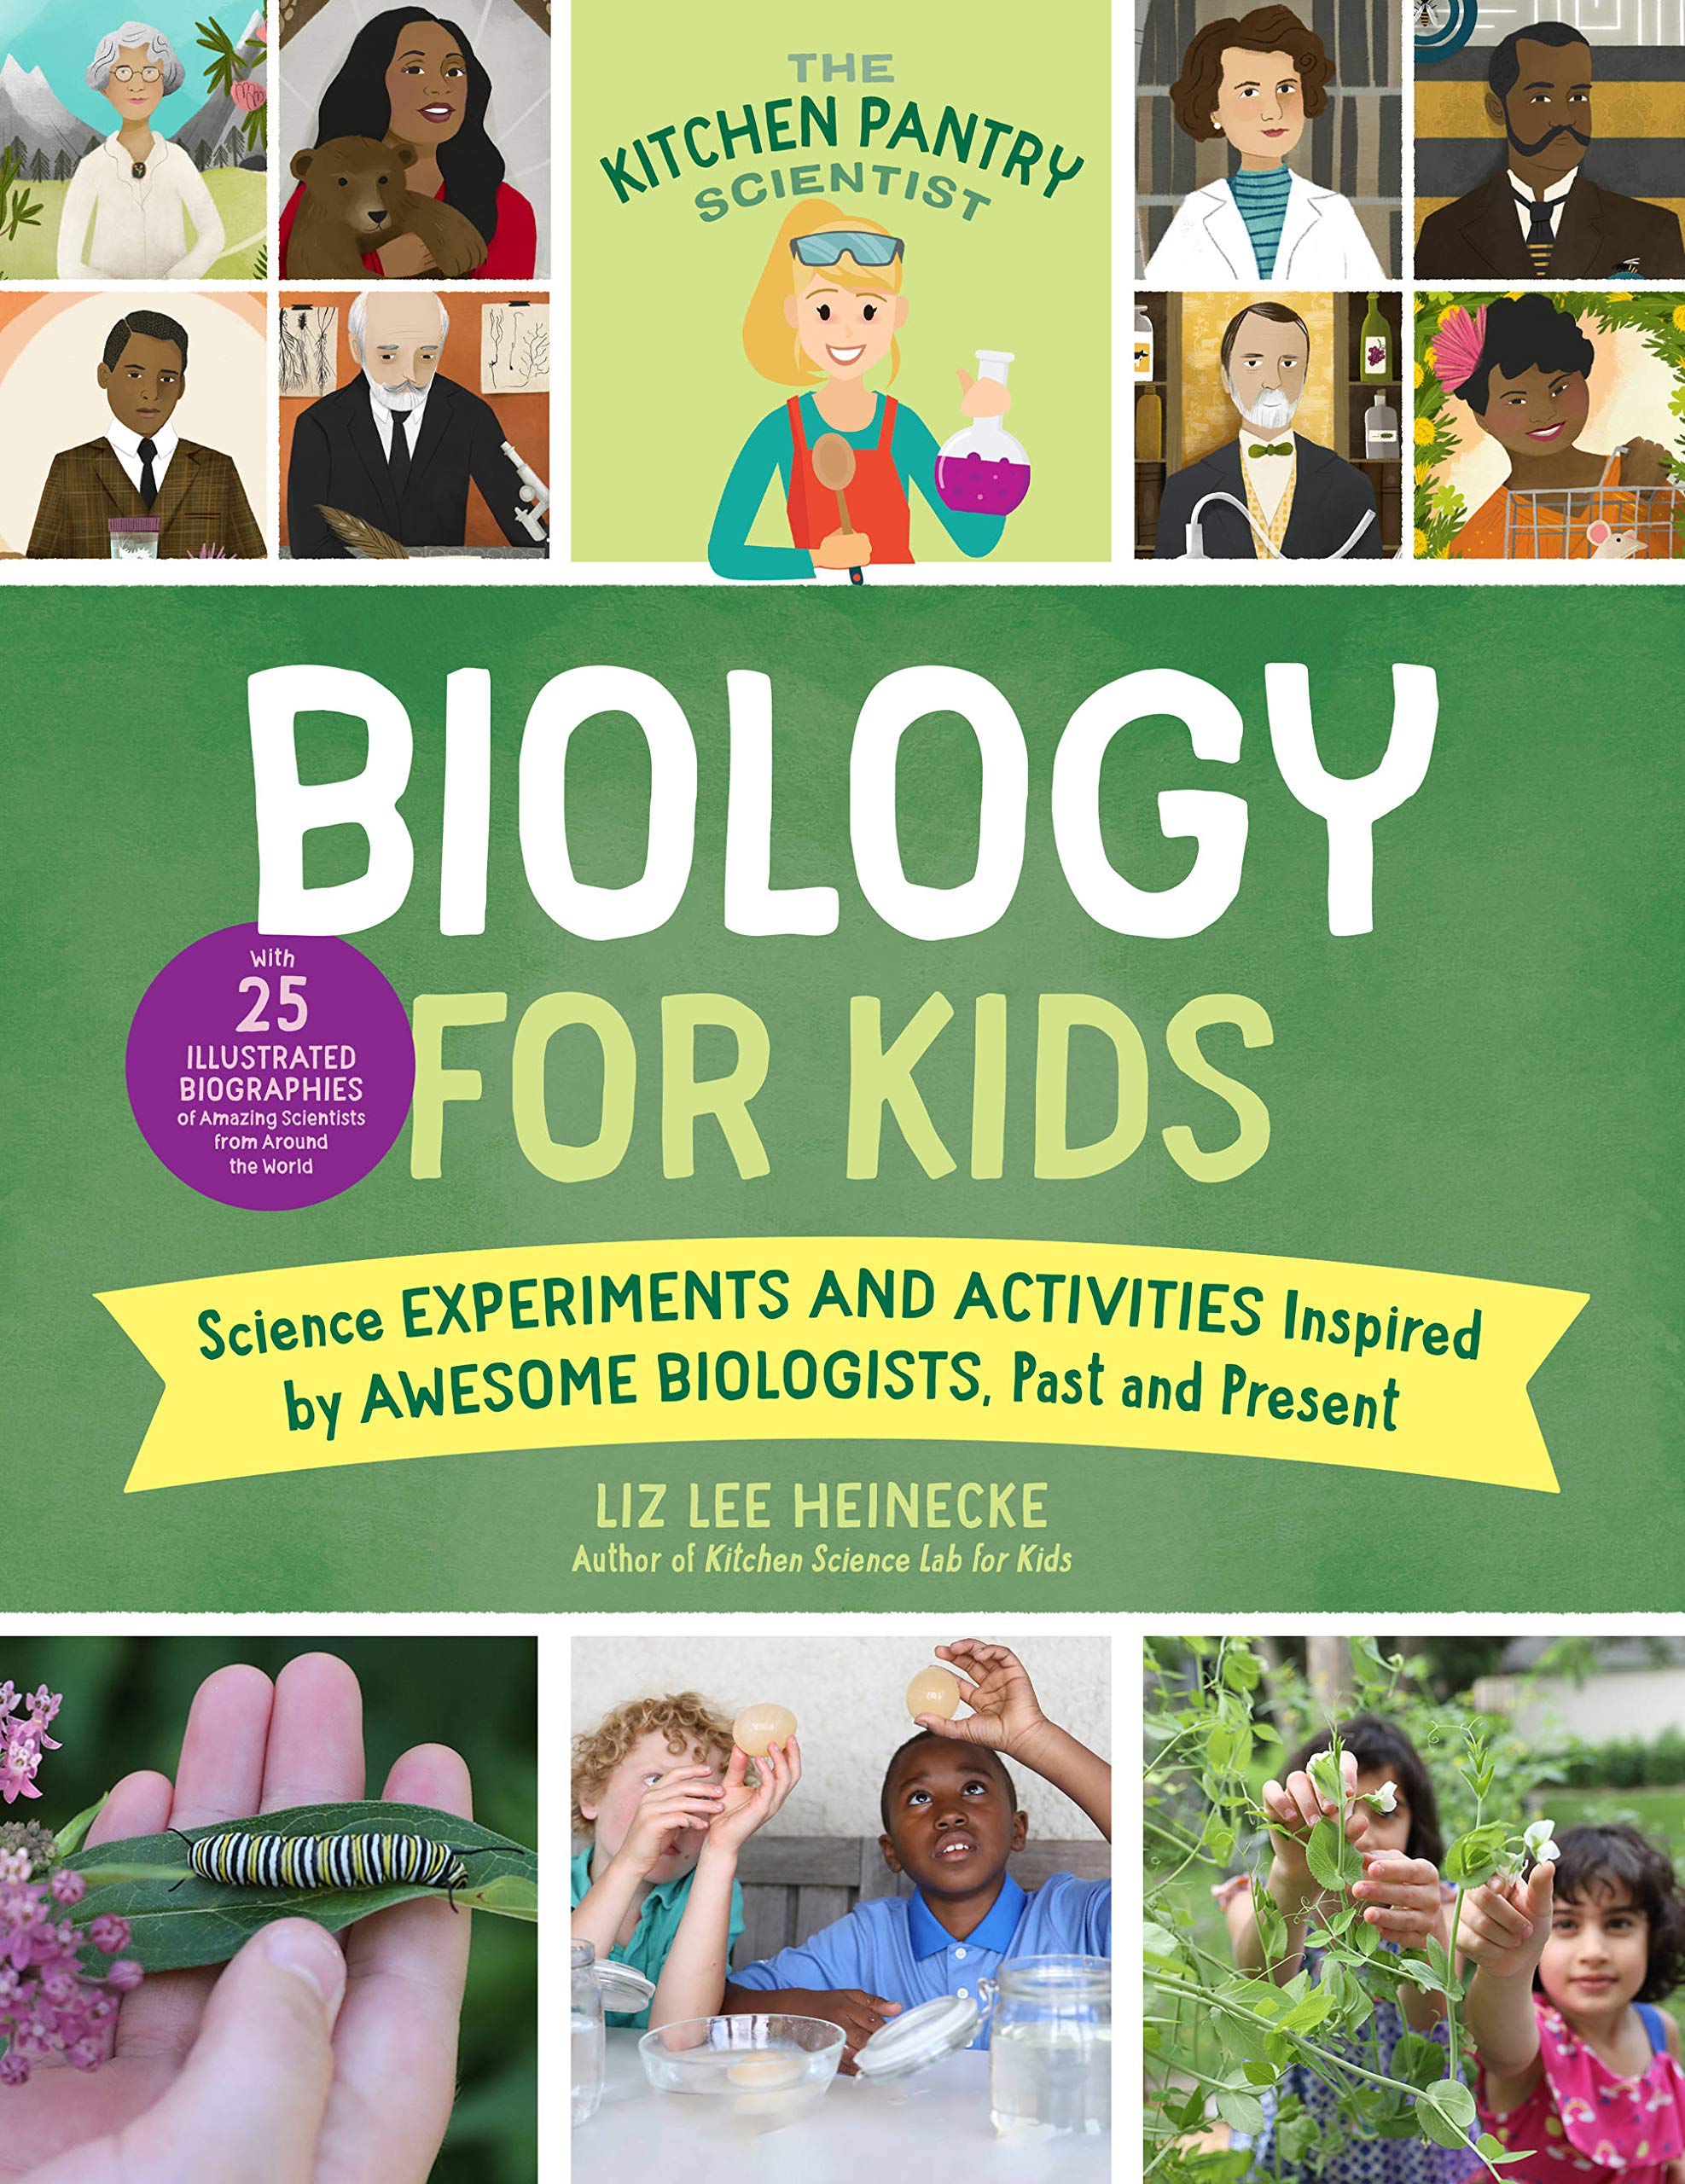 The Kitchen Pantry Scientist Biology for Kids: Homemade Science Experiments and Activities Inspired by Awesome Biologists, Past and Present